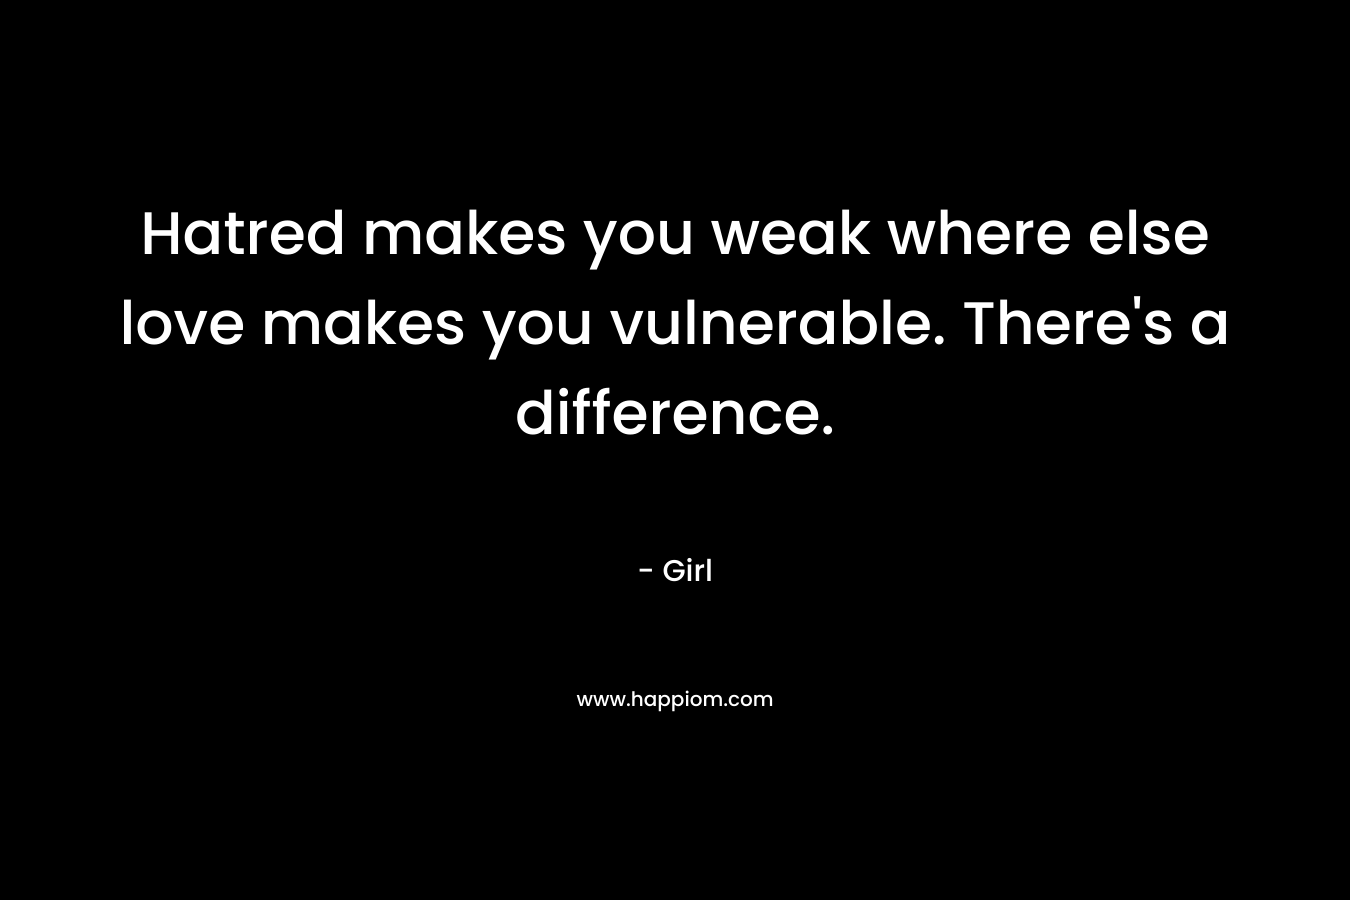 Hatred makes you weak where else love makes you vulnerable. There’s a difference. – Girl